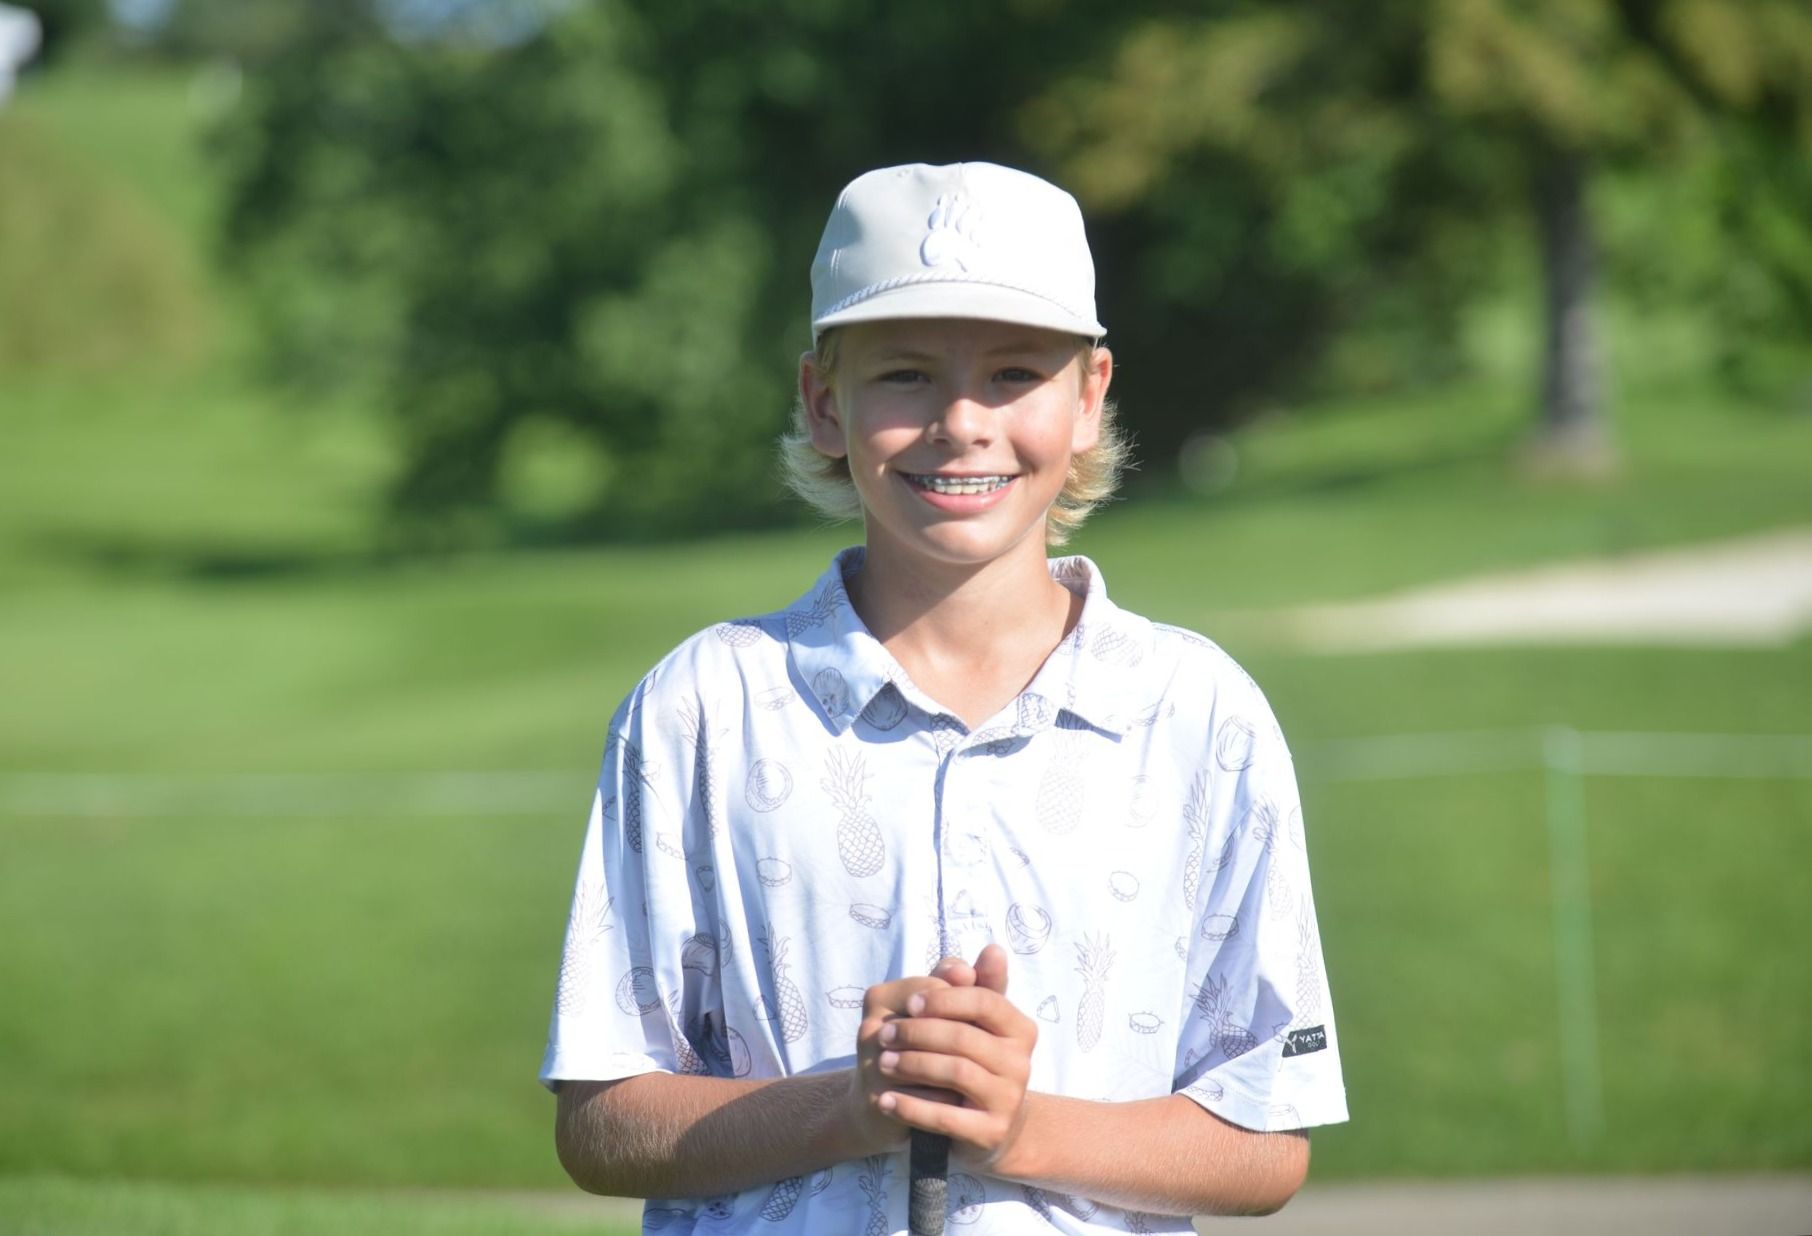 Elmira Golf Club plays host to tournament featuring young players